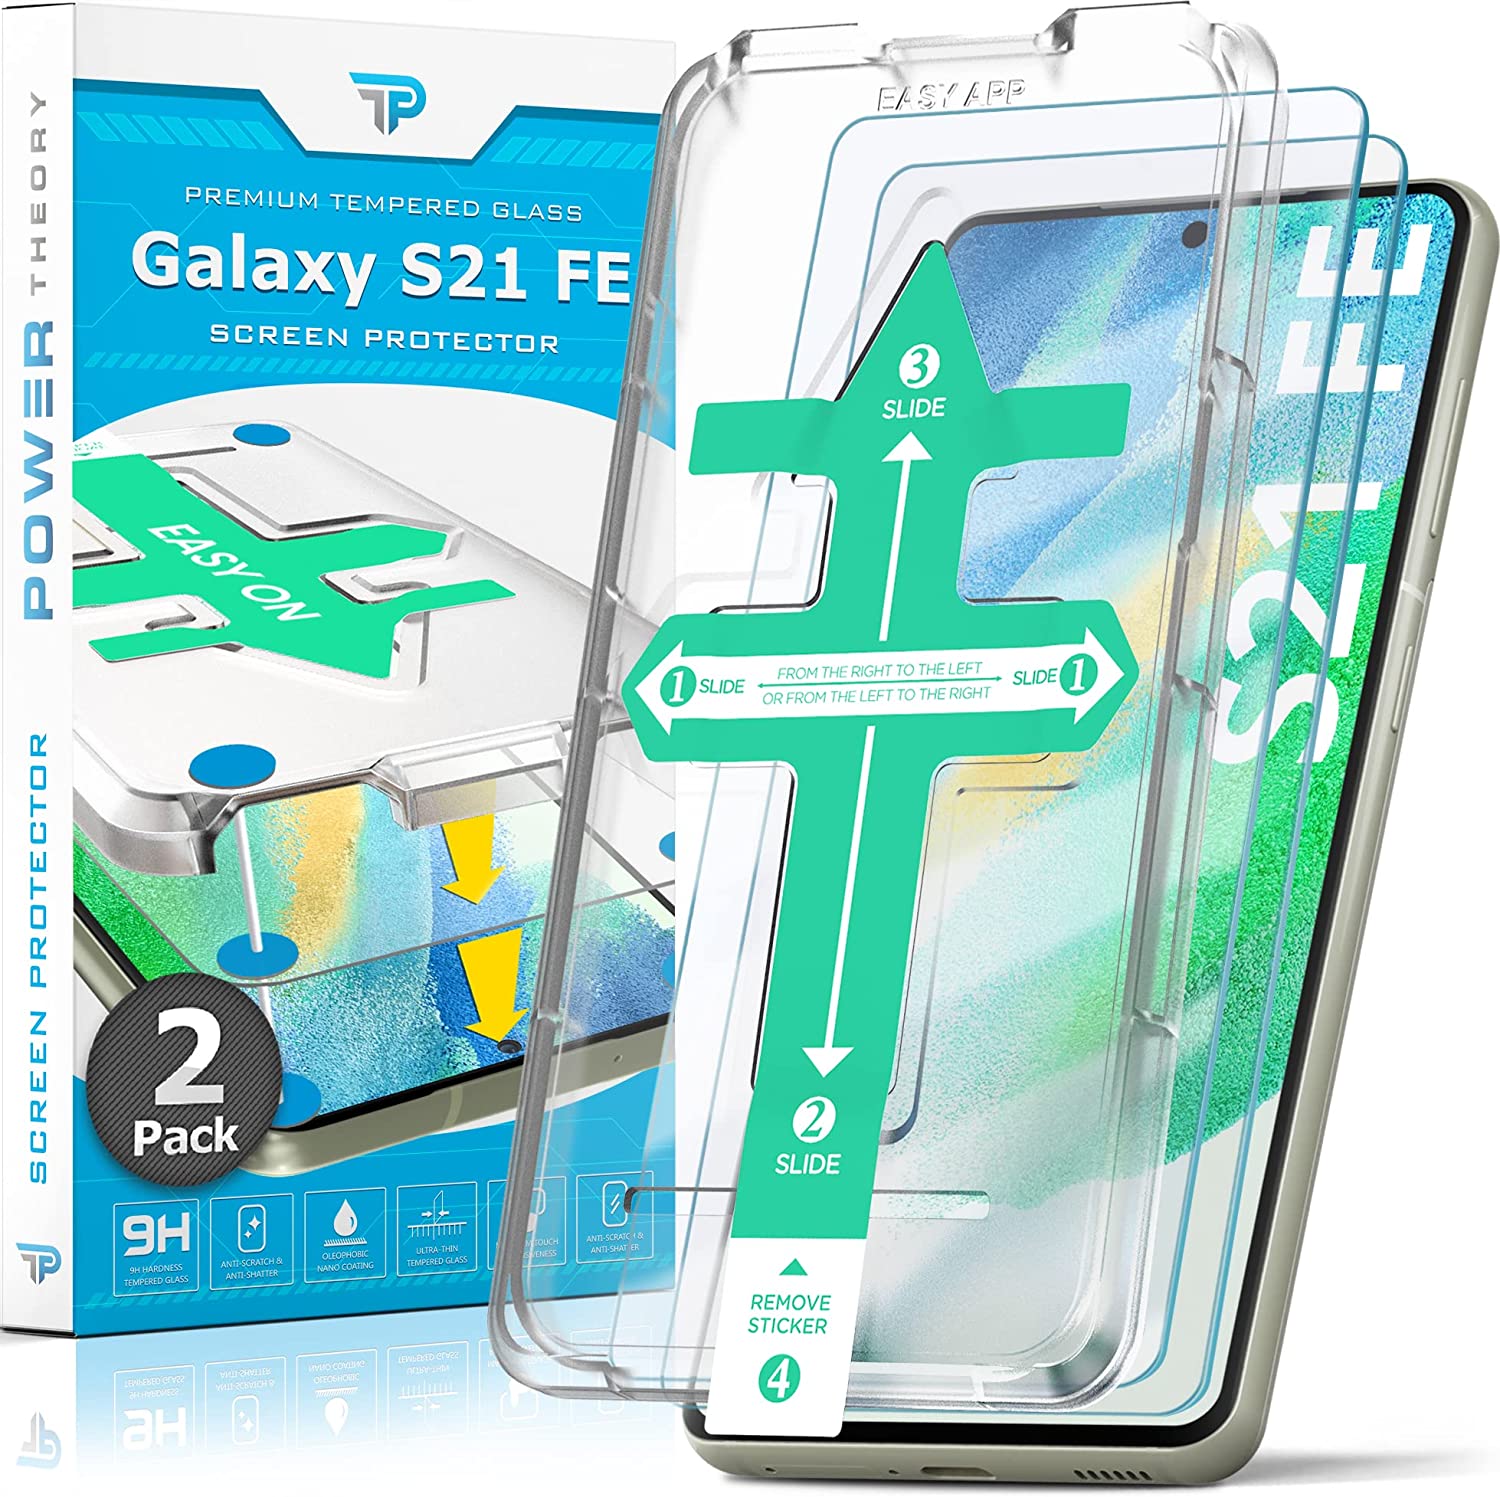 Samsung Galaxy S21 FE 5G Steel 360 Antimicrobial Tempered Glass Screen  Protector with Alignment Tray and Pure Pledge up to $100